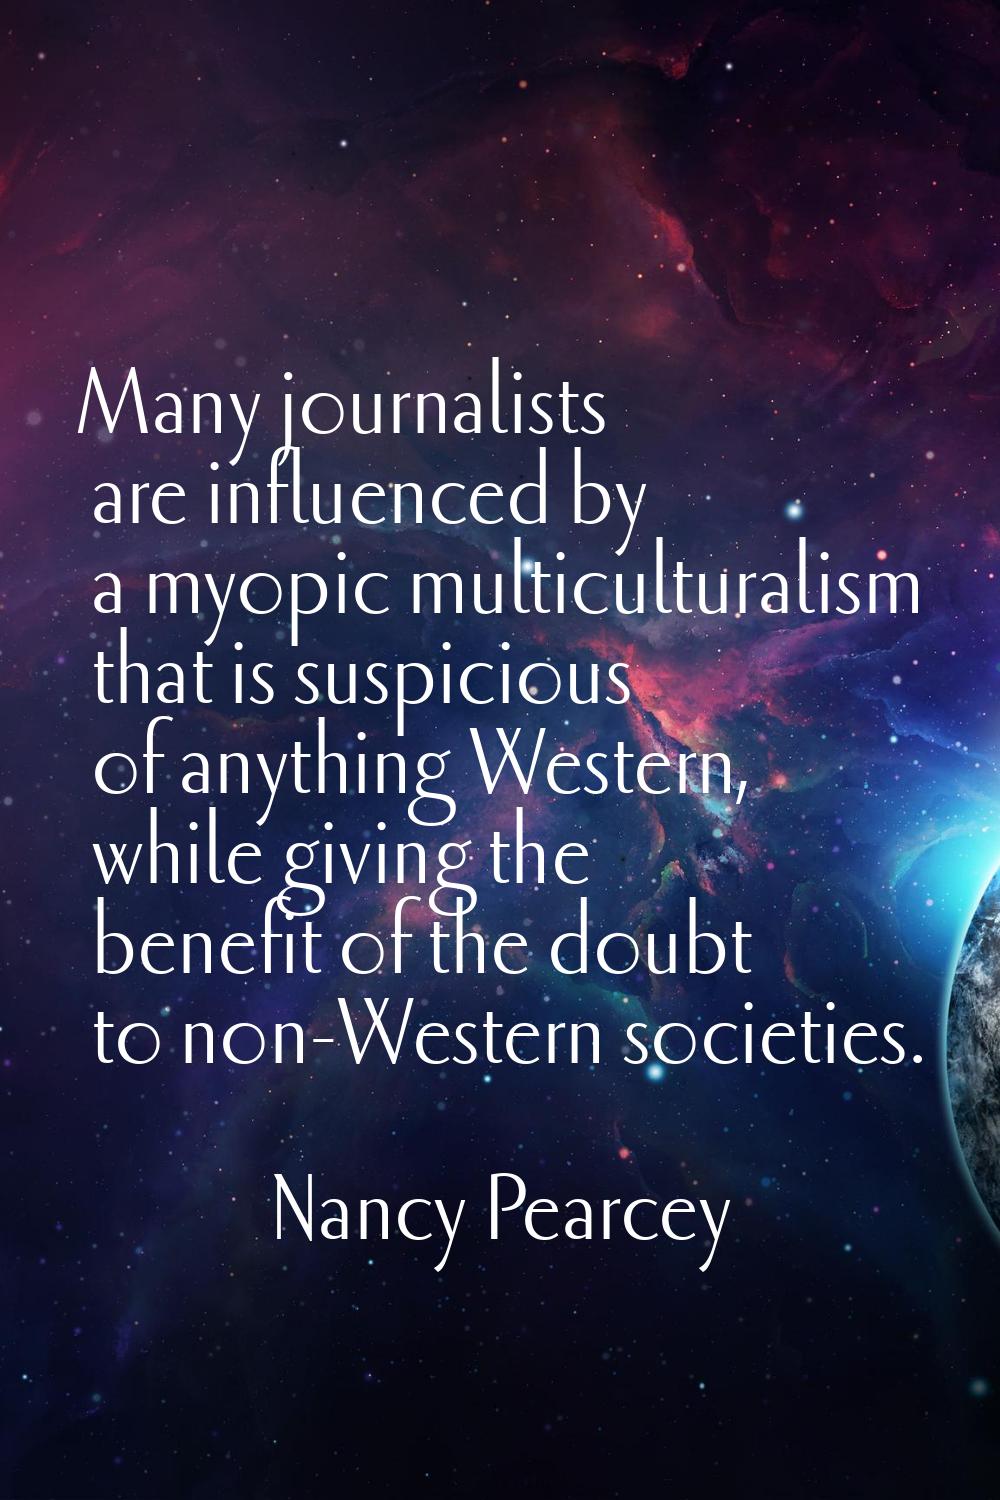 Many journalists are influenced by a myopic multiculturalism that is suspicious of anything Western